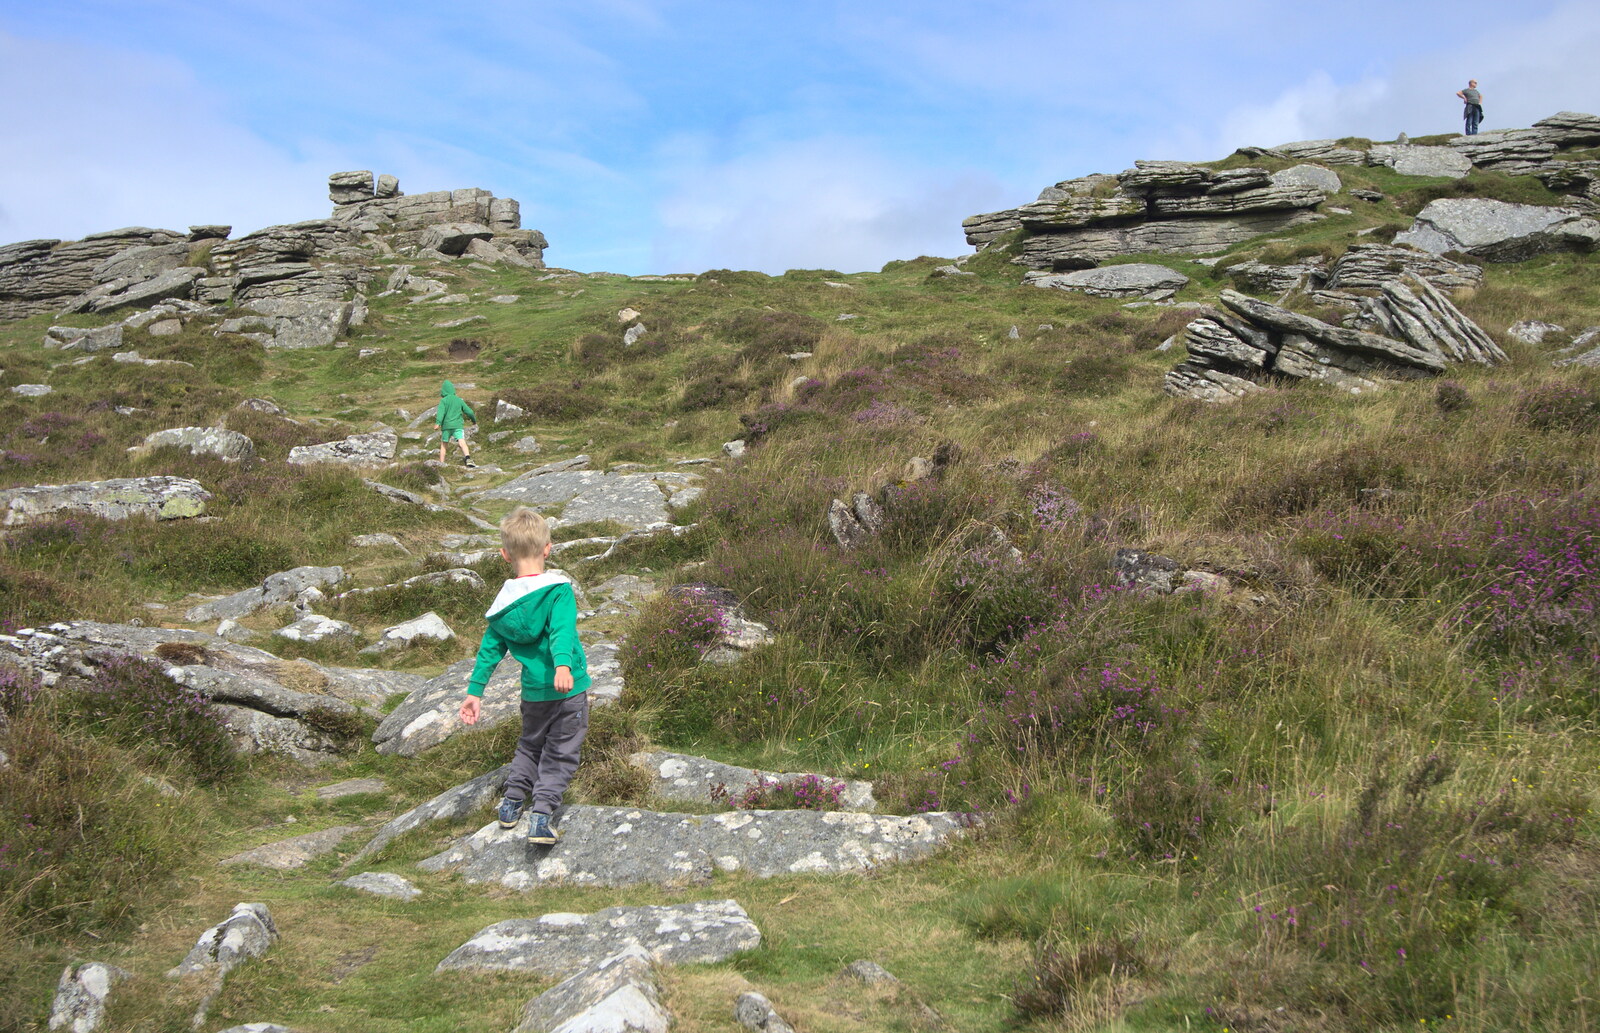 Harry runs up the tor from Badger's Holt and Bronze-Age Grimspound, Dartmoor, Devon - 10th August 2016